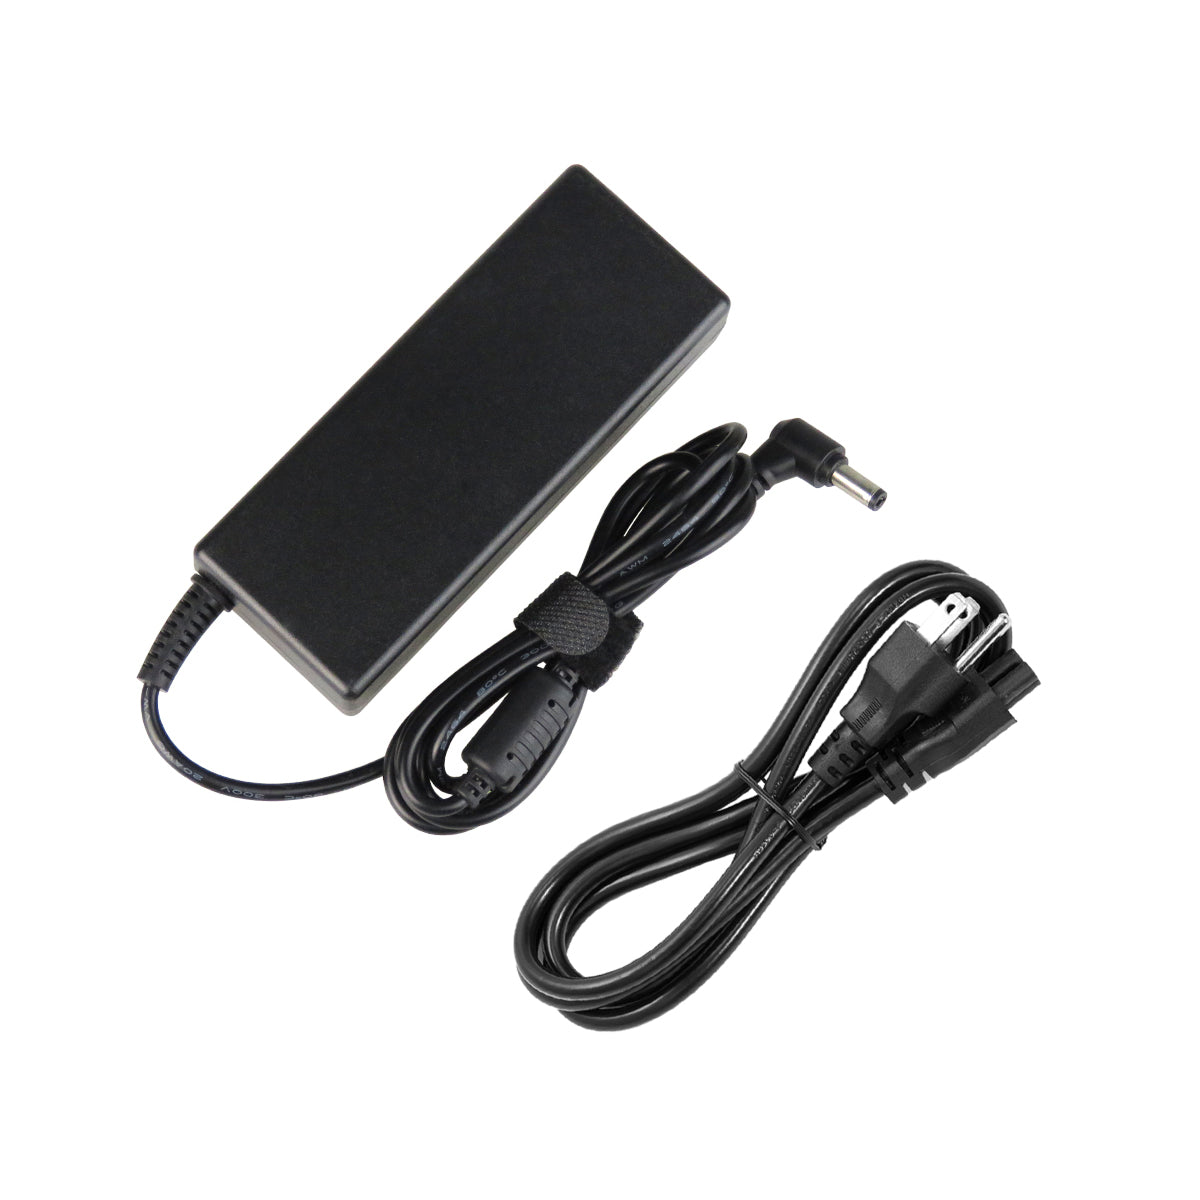 AC Adapter Charger for ASUS X54L-SX043D Notebook.